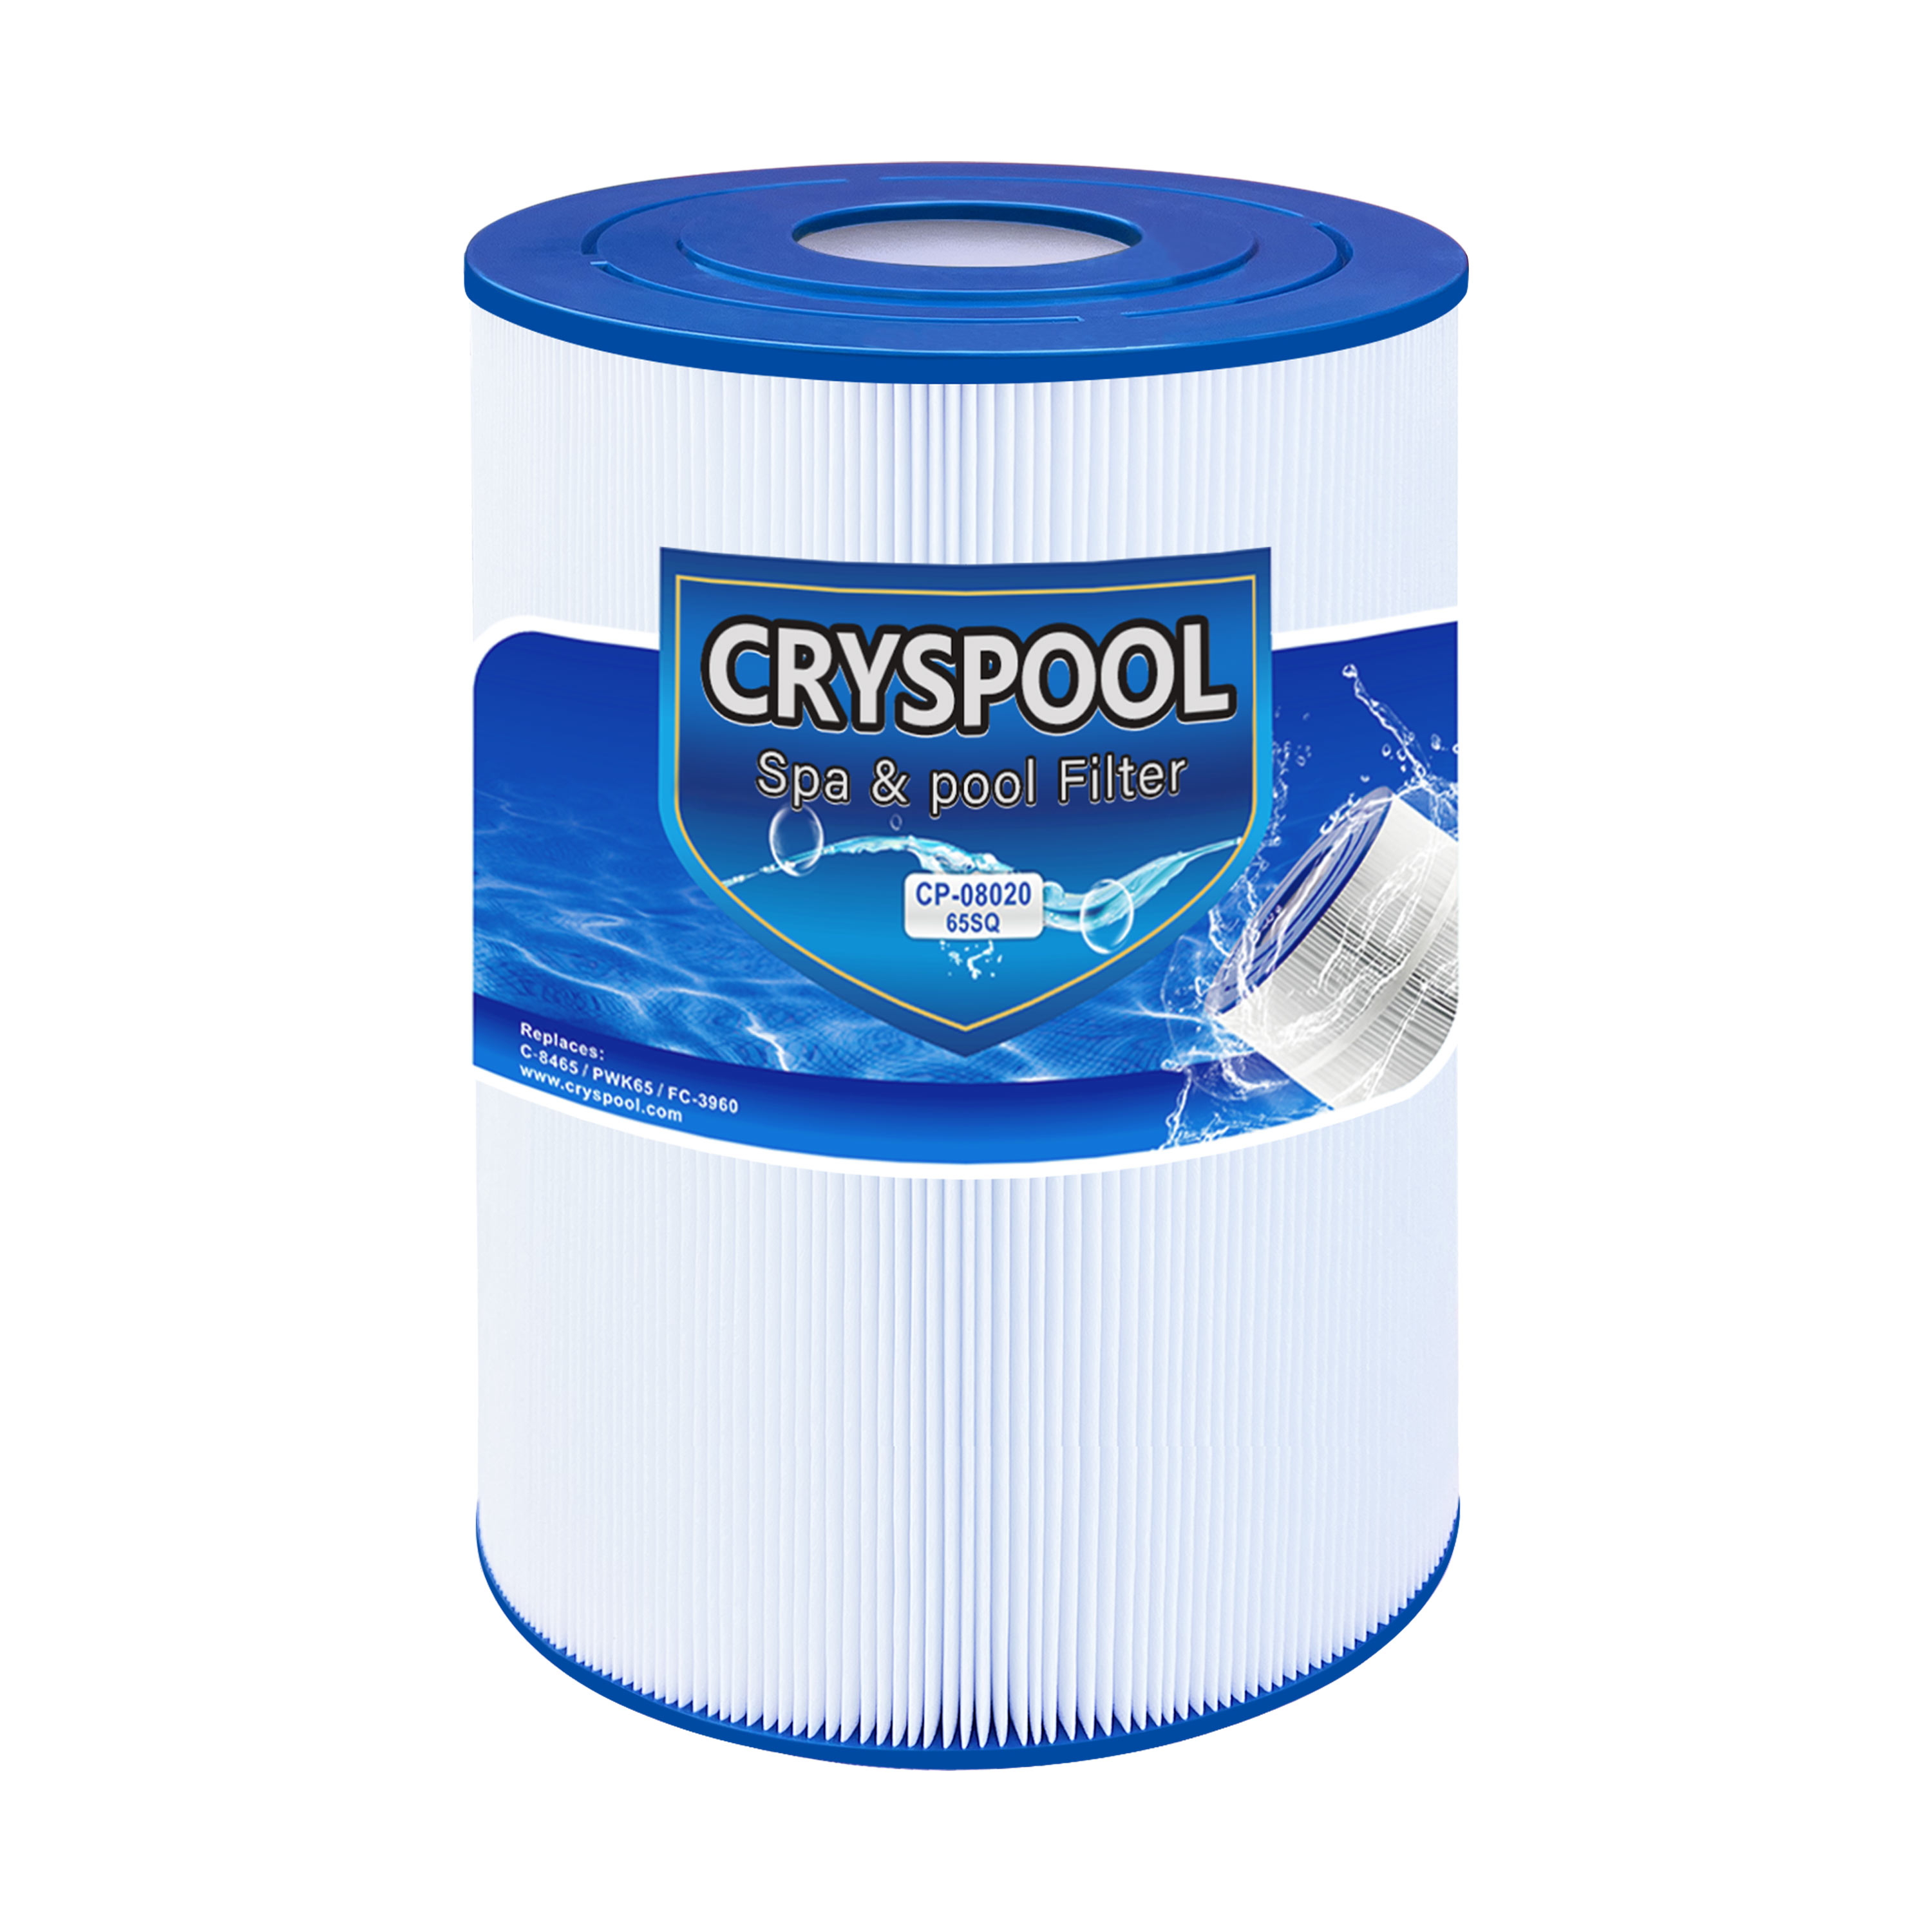 Cryspool pwk65 Compatible with Watkins 31114, Hot Spot spa Filter,Unicel C-8465, Filbur FC-3960, 71827, 71828, Watkins 65 sq.ft hot tub Filter. Featured Image